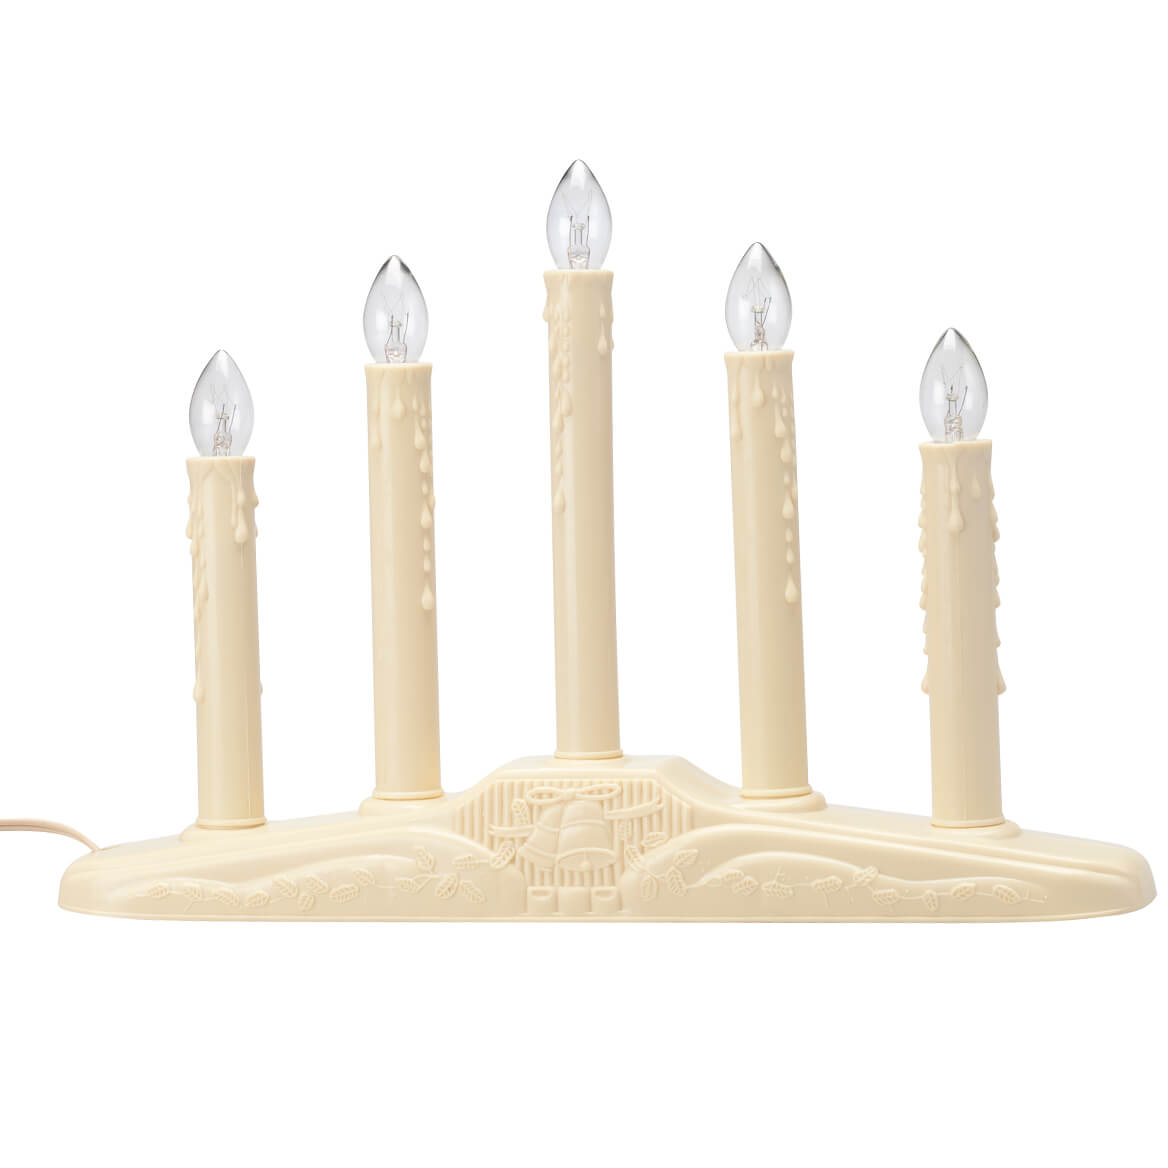 5 Ivory Candolier C7 Incandescent Clear Novelty Lights with Ivory Cord